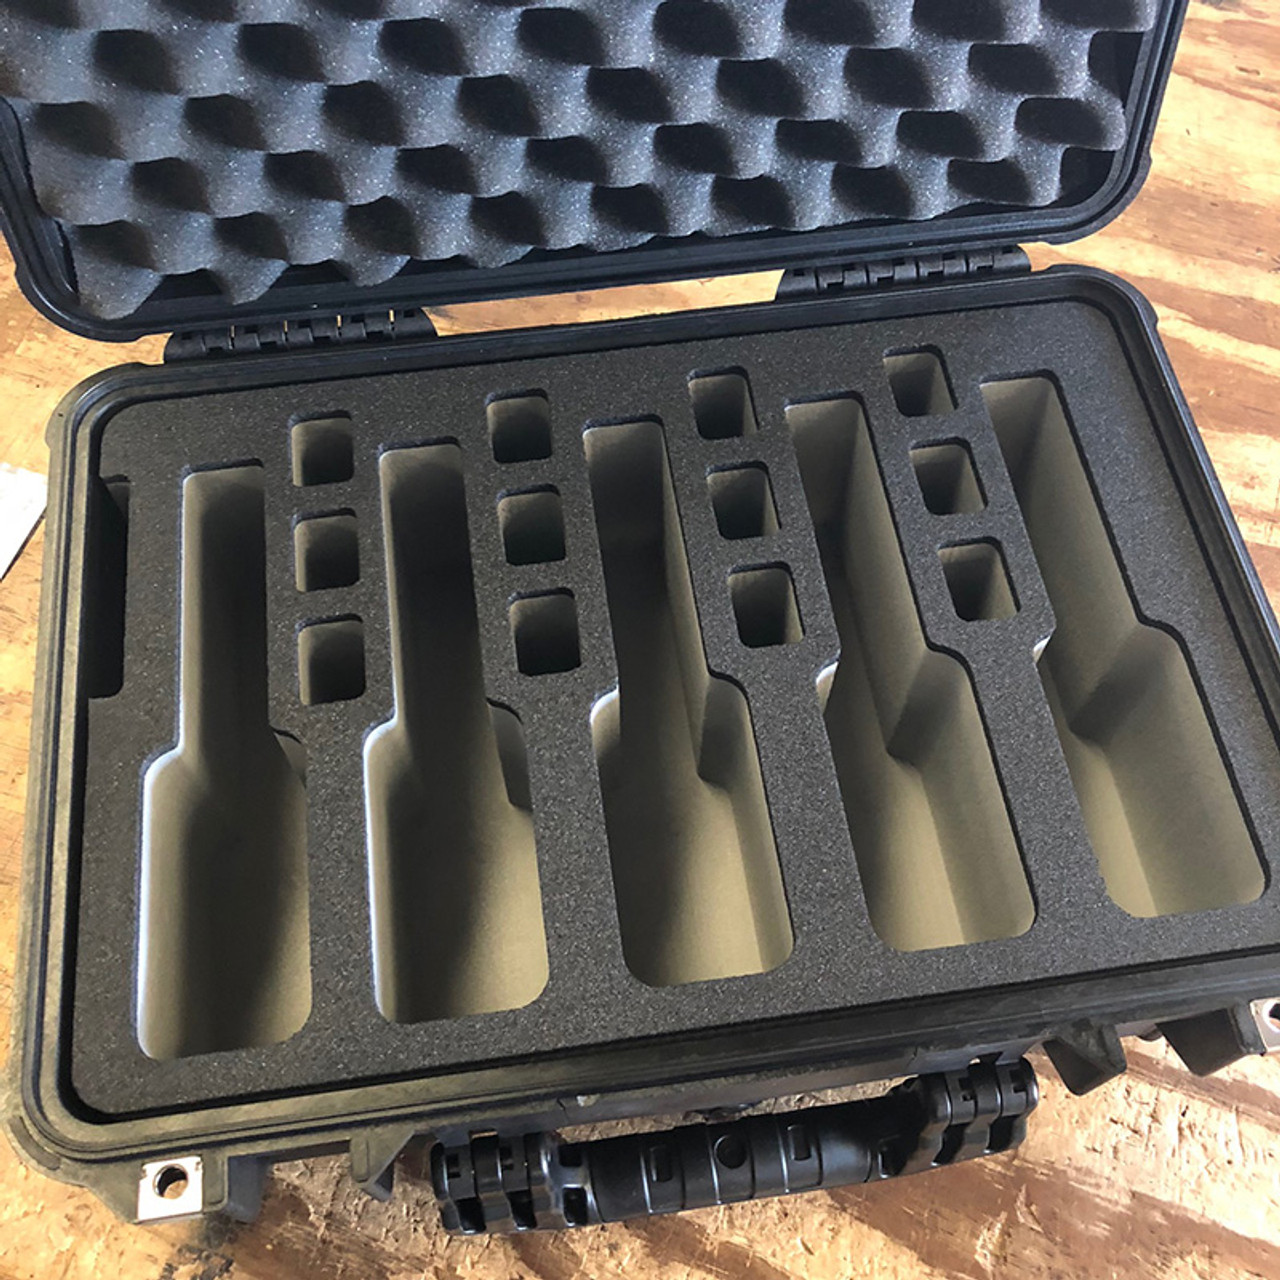  Pistol & Magazine Storage Foam Insert For Pelican P-1500 Case, 2 Piece Set, Pre-Cut Military Grade Polyethylene Base And Protective Lid  Liner (Case Not Included)